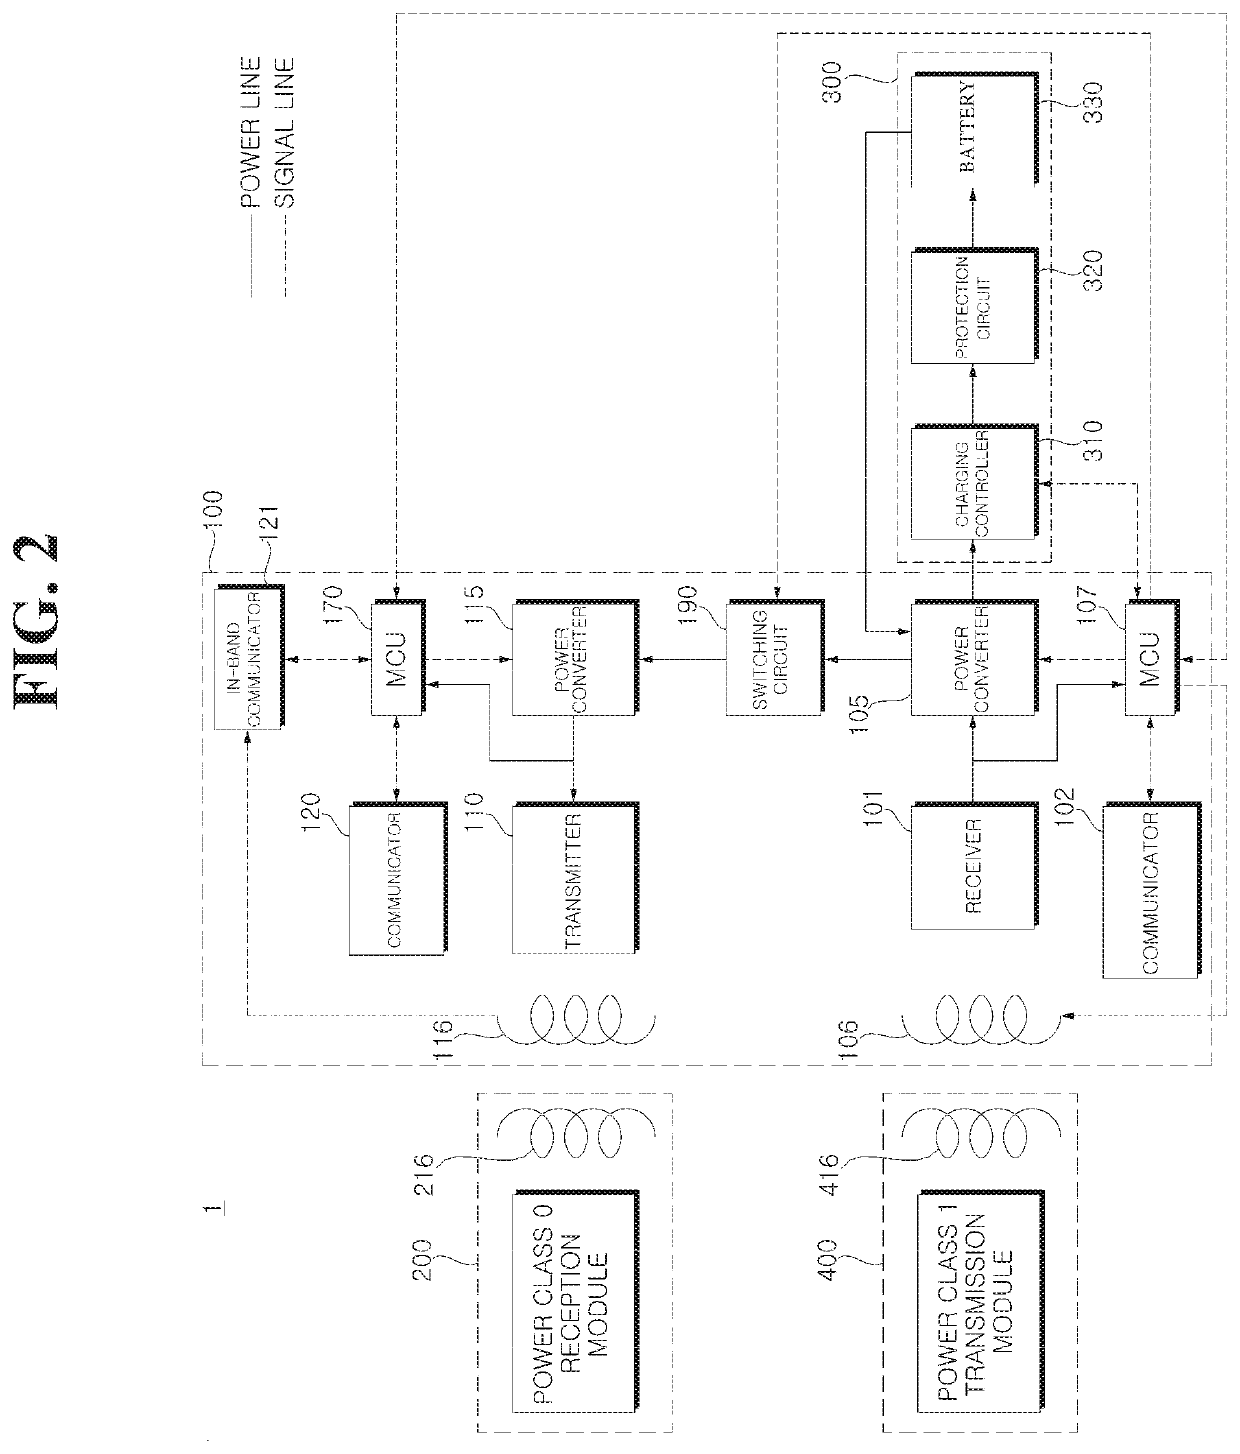 Power relay device and system